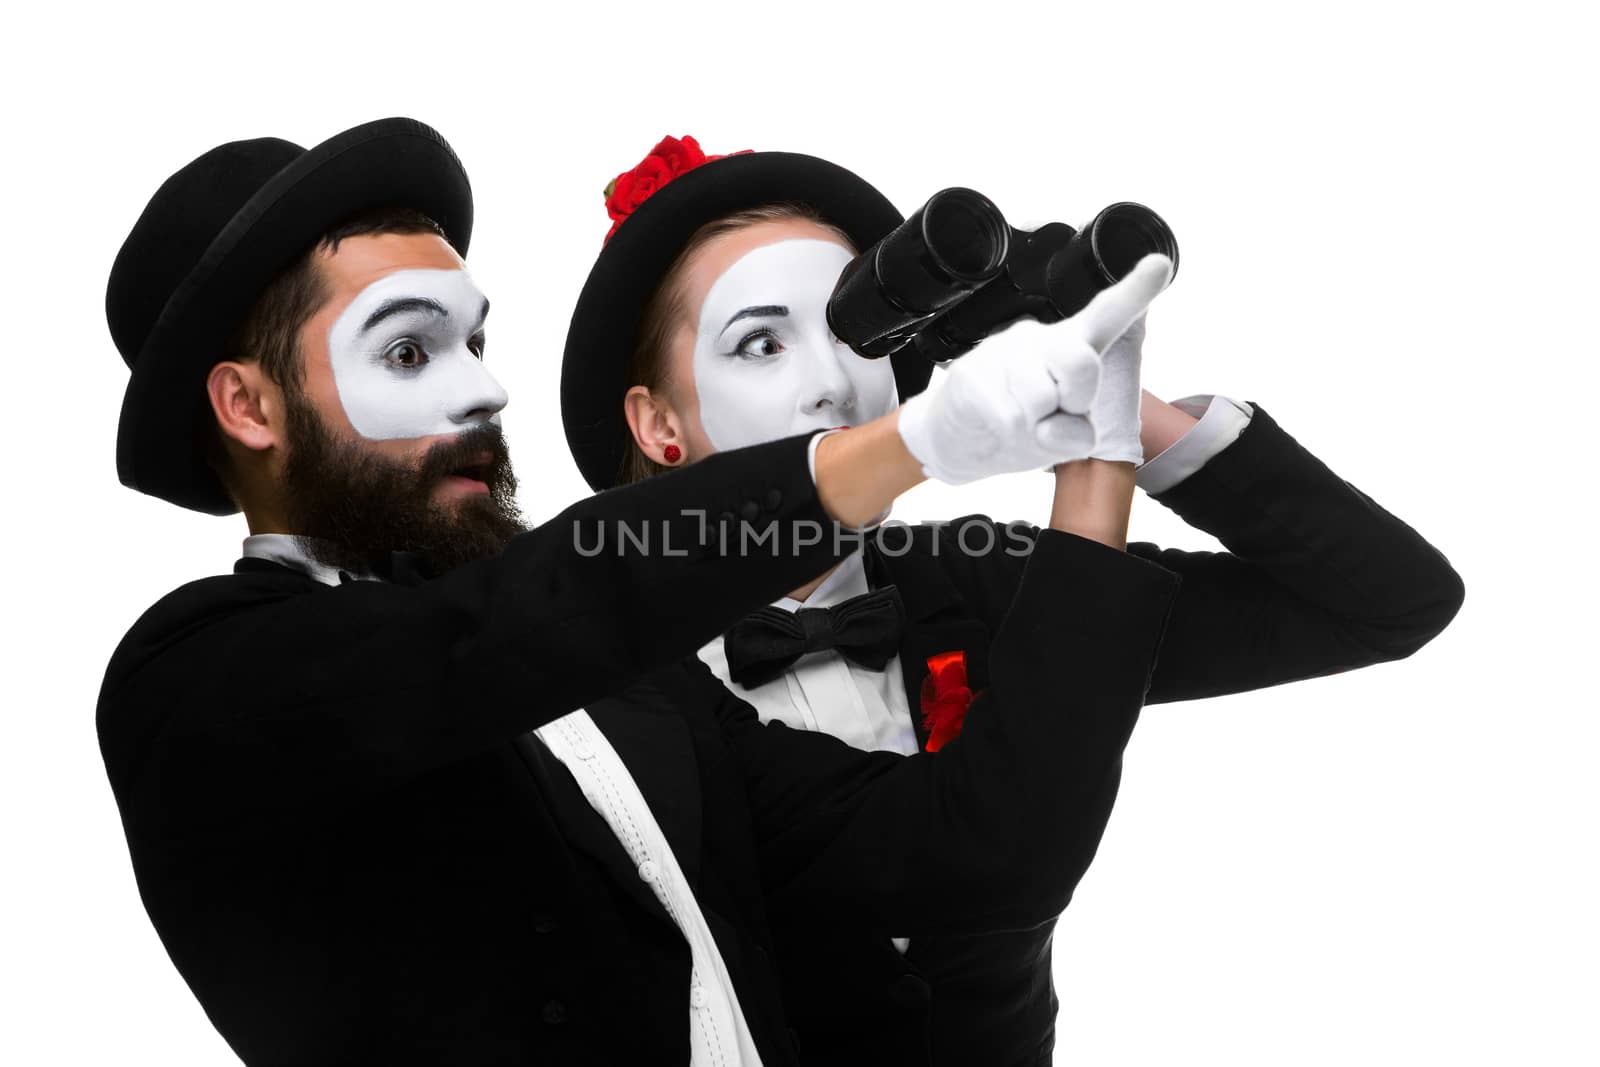 Two memes as business people  looking through binoculars isolated on white background. concept of search and surprise